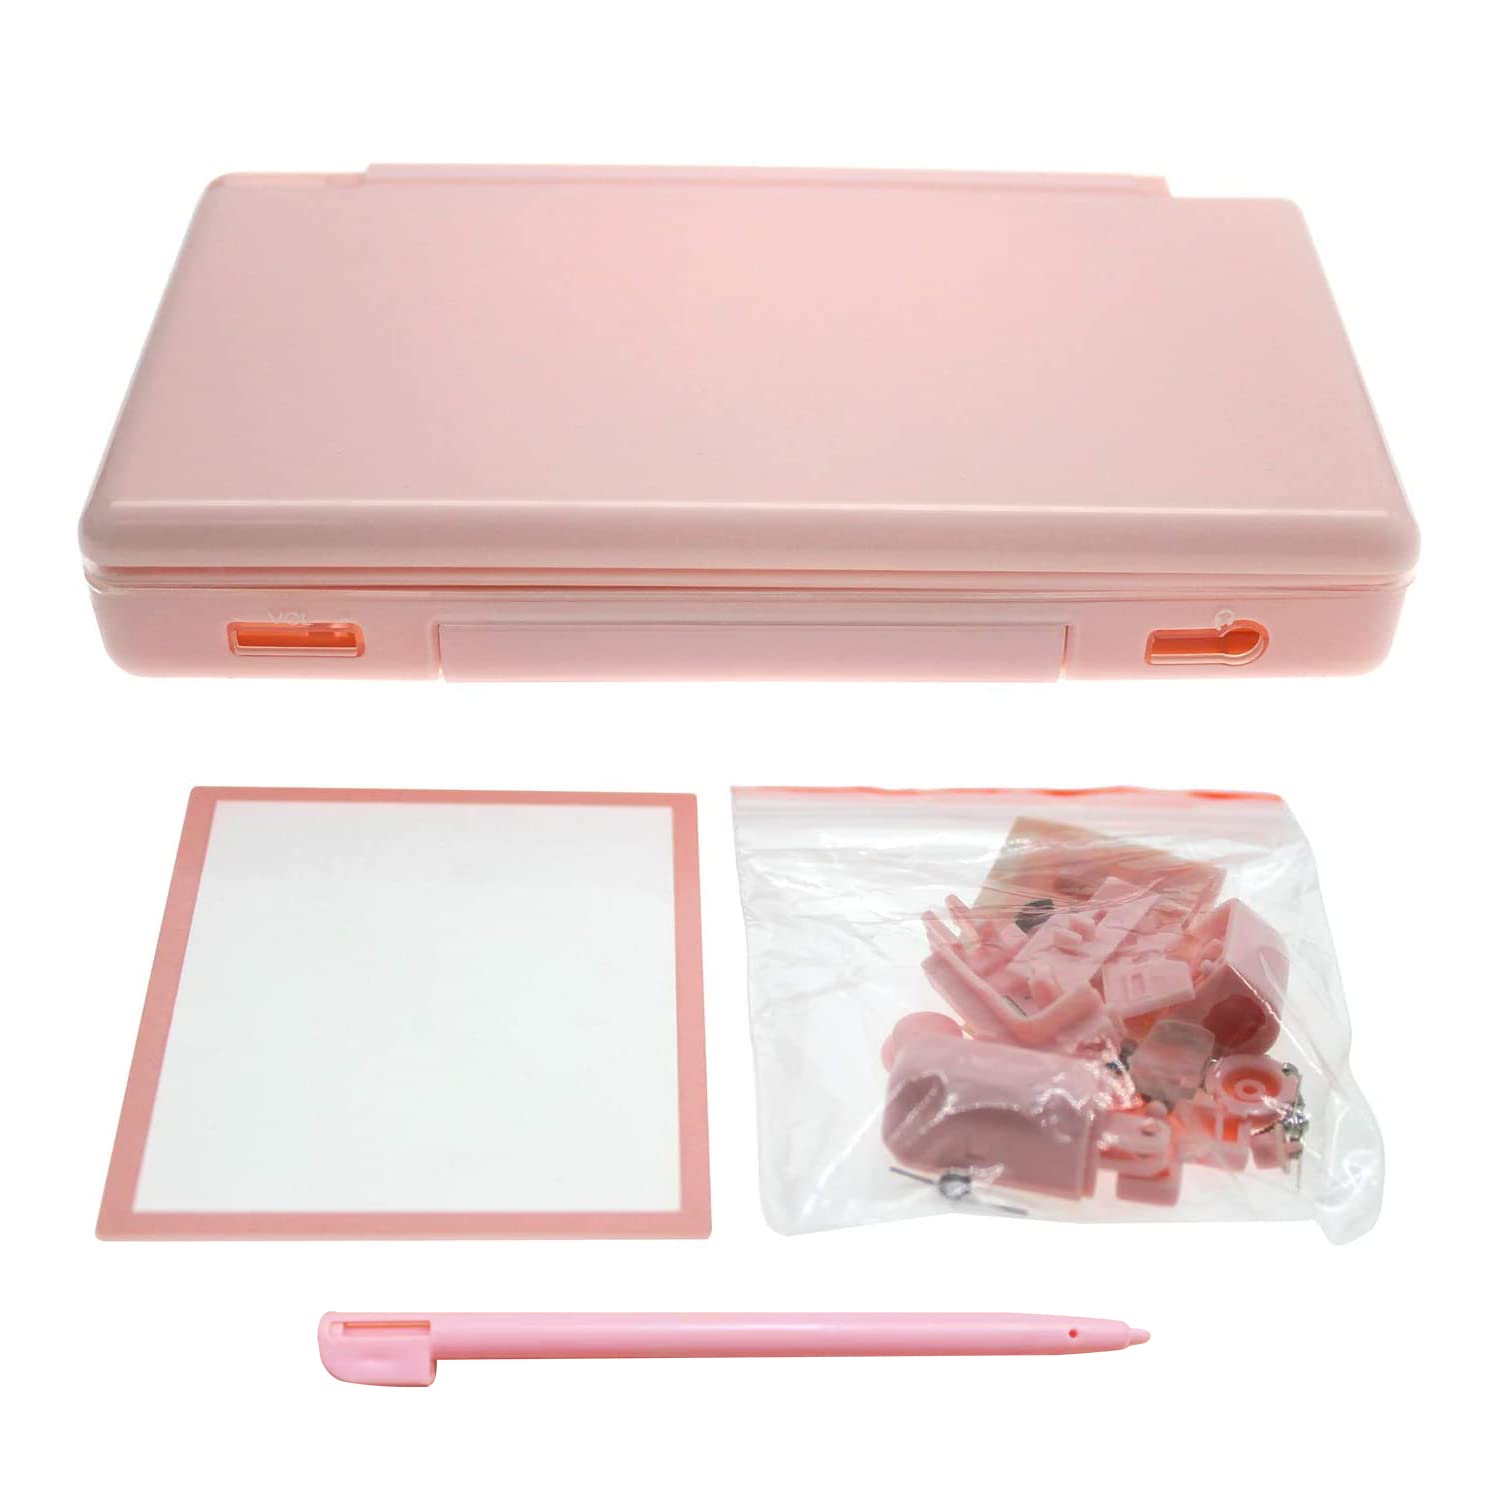 OSTENT Full Repair Parts Replacement Housing Shell Case Kit for Nintendo DS Lite NDSL Color Pink